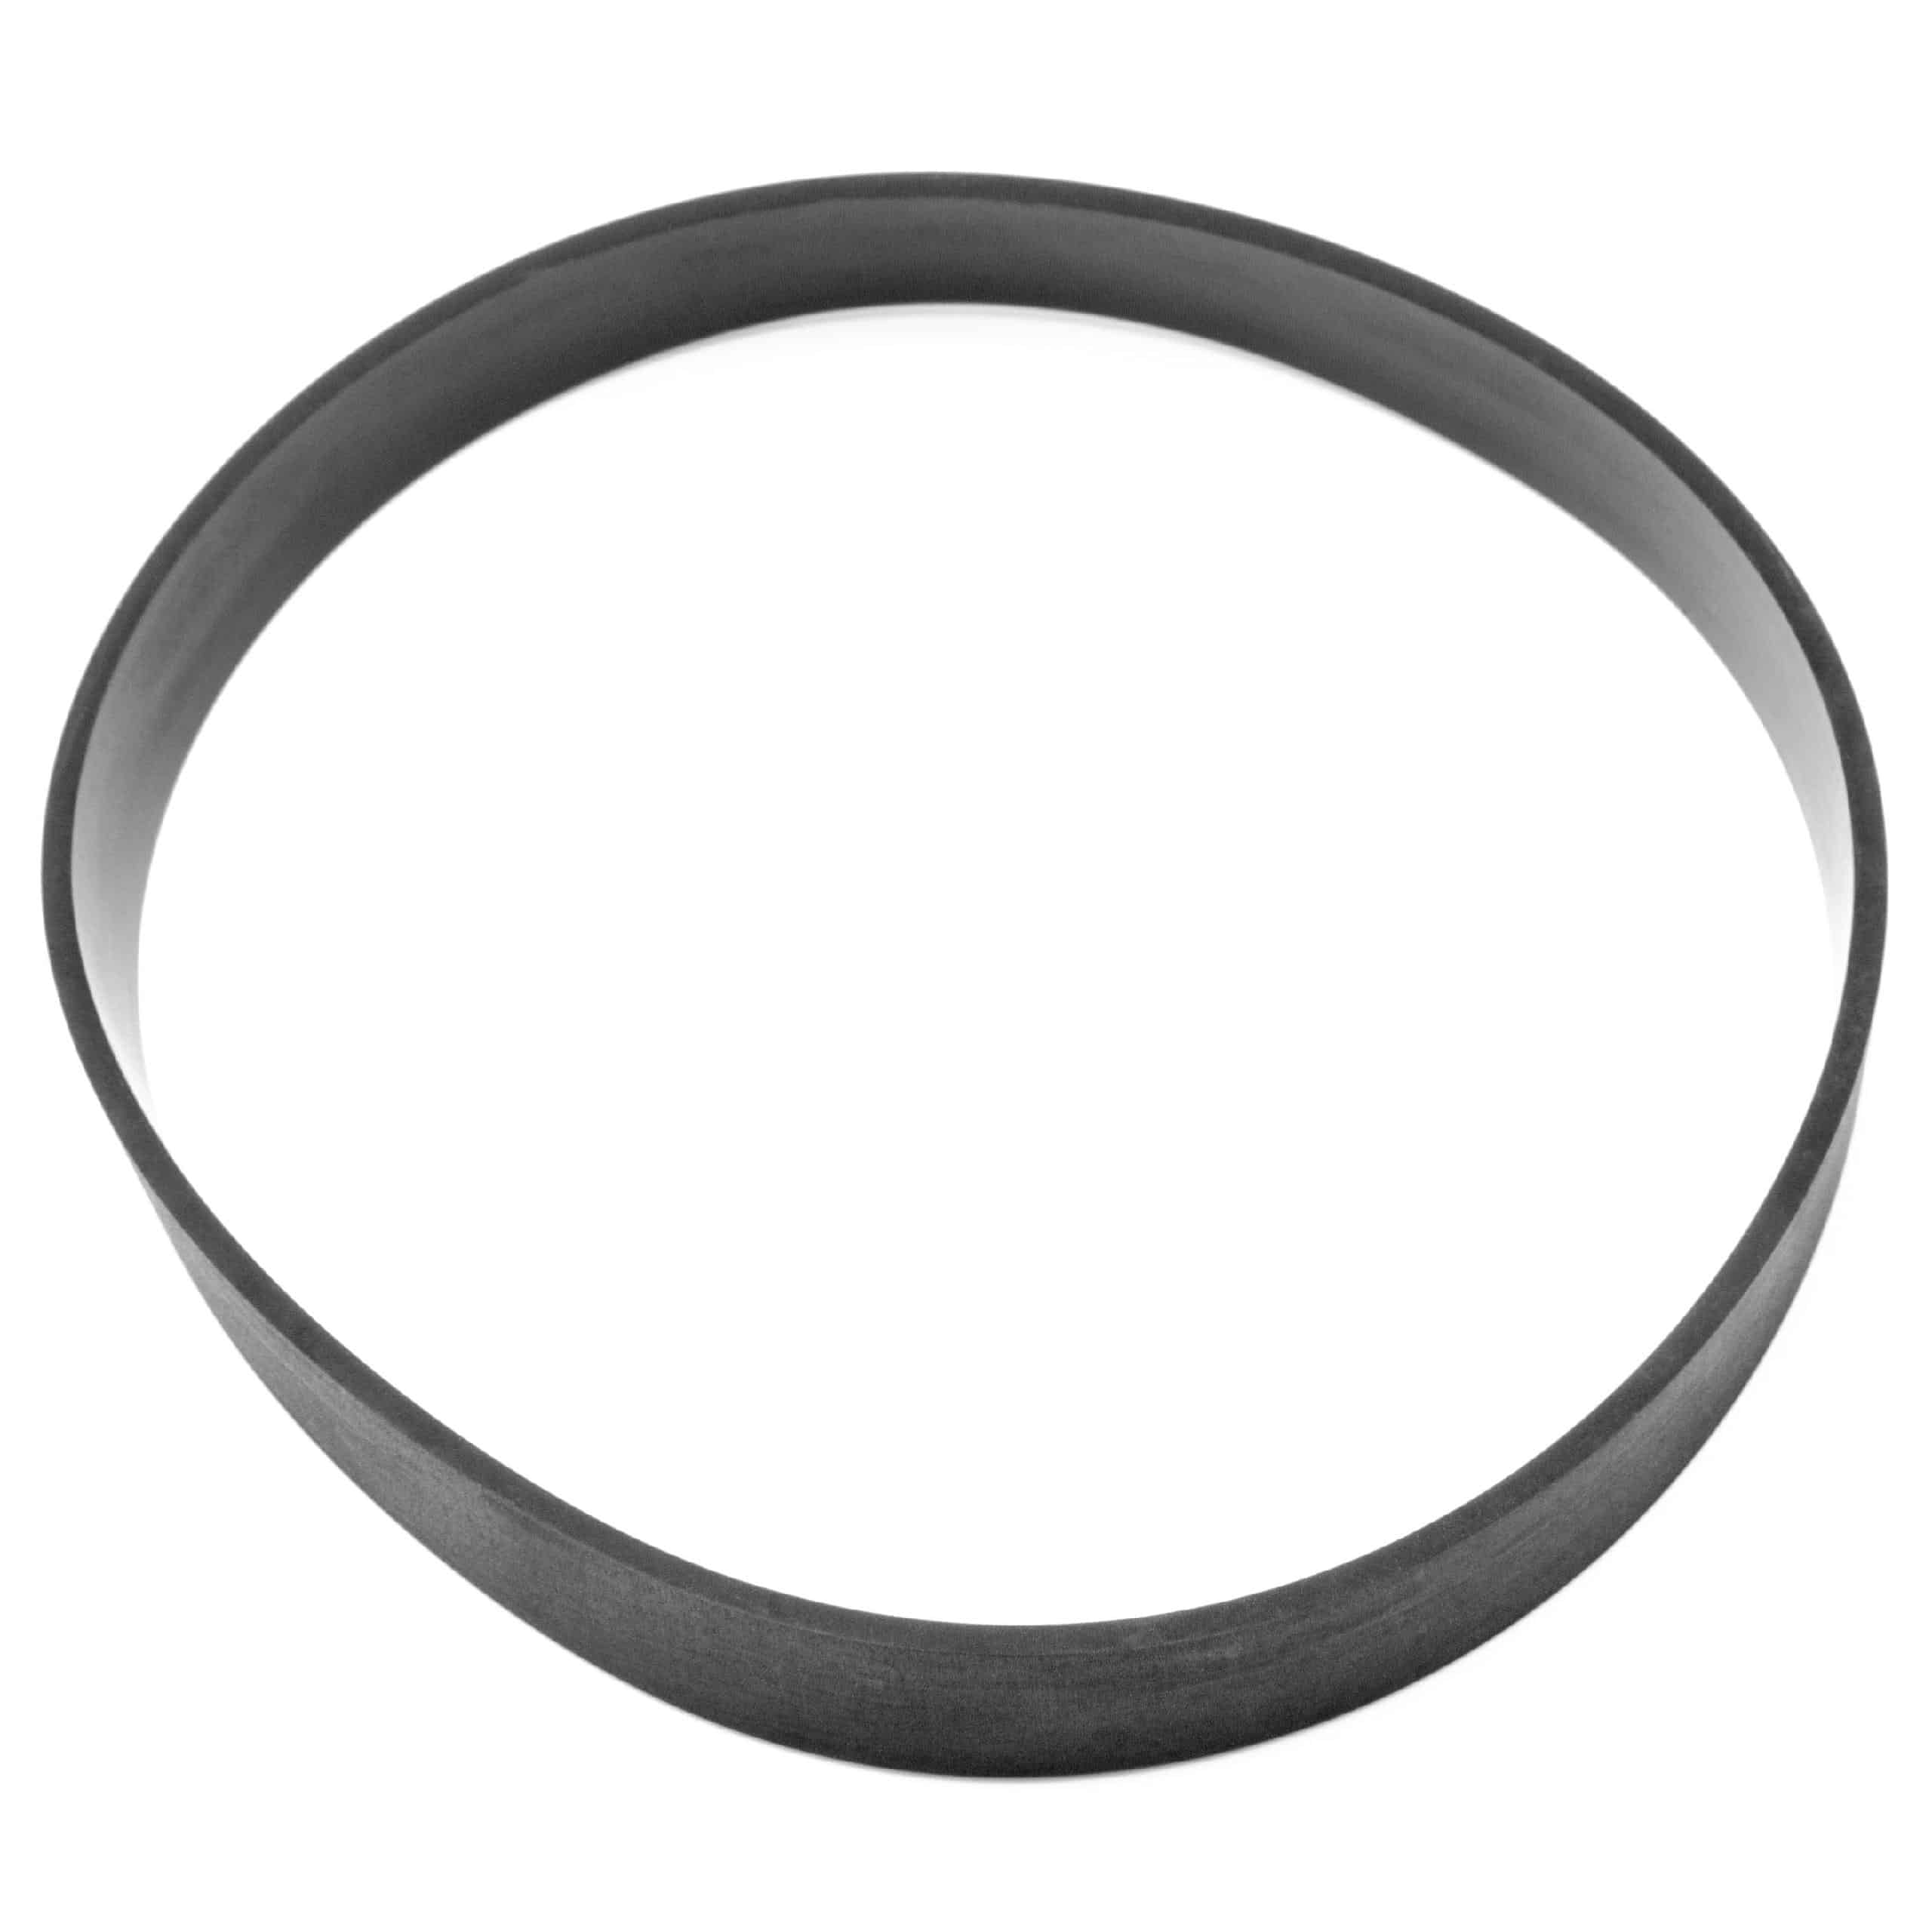 Drive Belt Replacement for Bissell 28B7-e for Bissell Vacuum Cleaner - Flat Belt